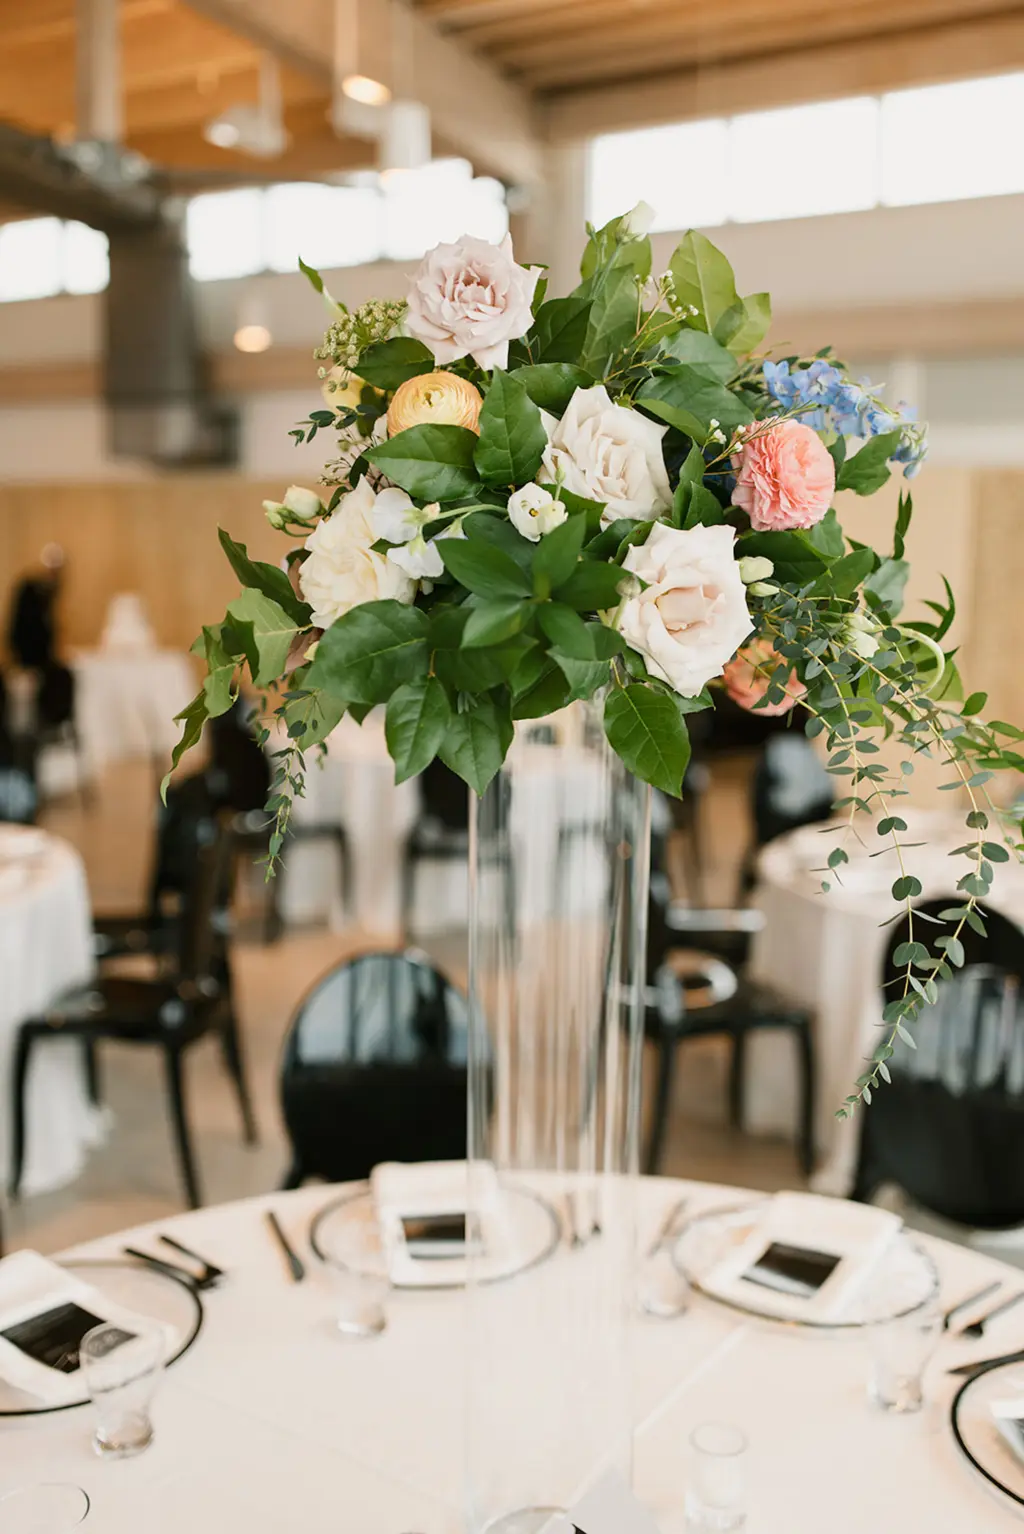 Pastel Spring Wedding Reception Centerpiece Decor Ideas | Pink Garden Roses, White Roses, Blue Stock Flowers, and Greenery